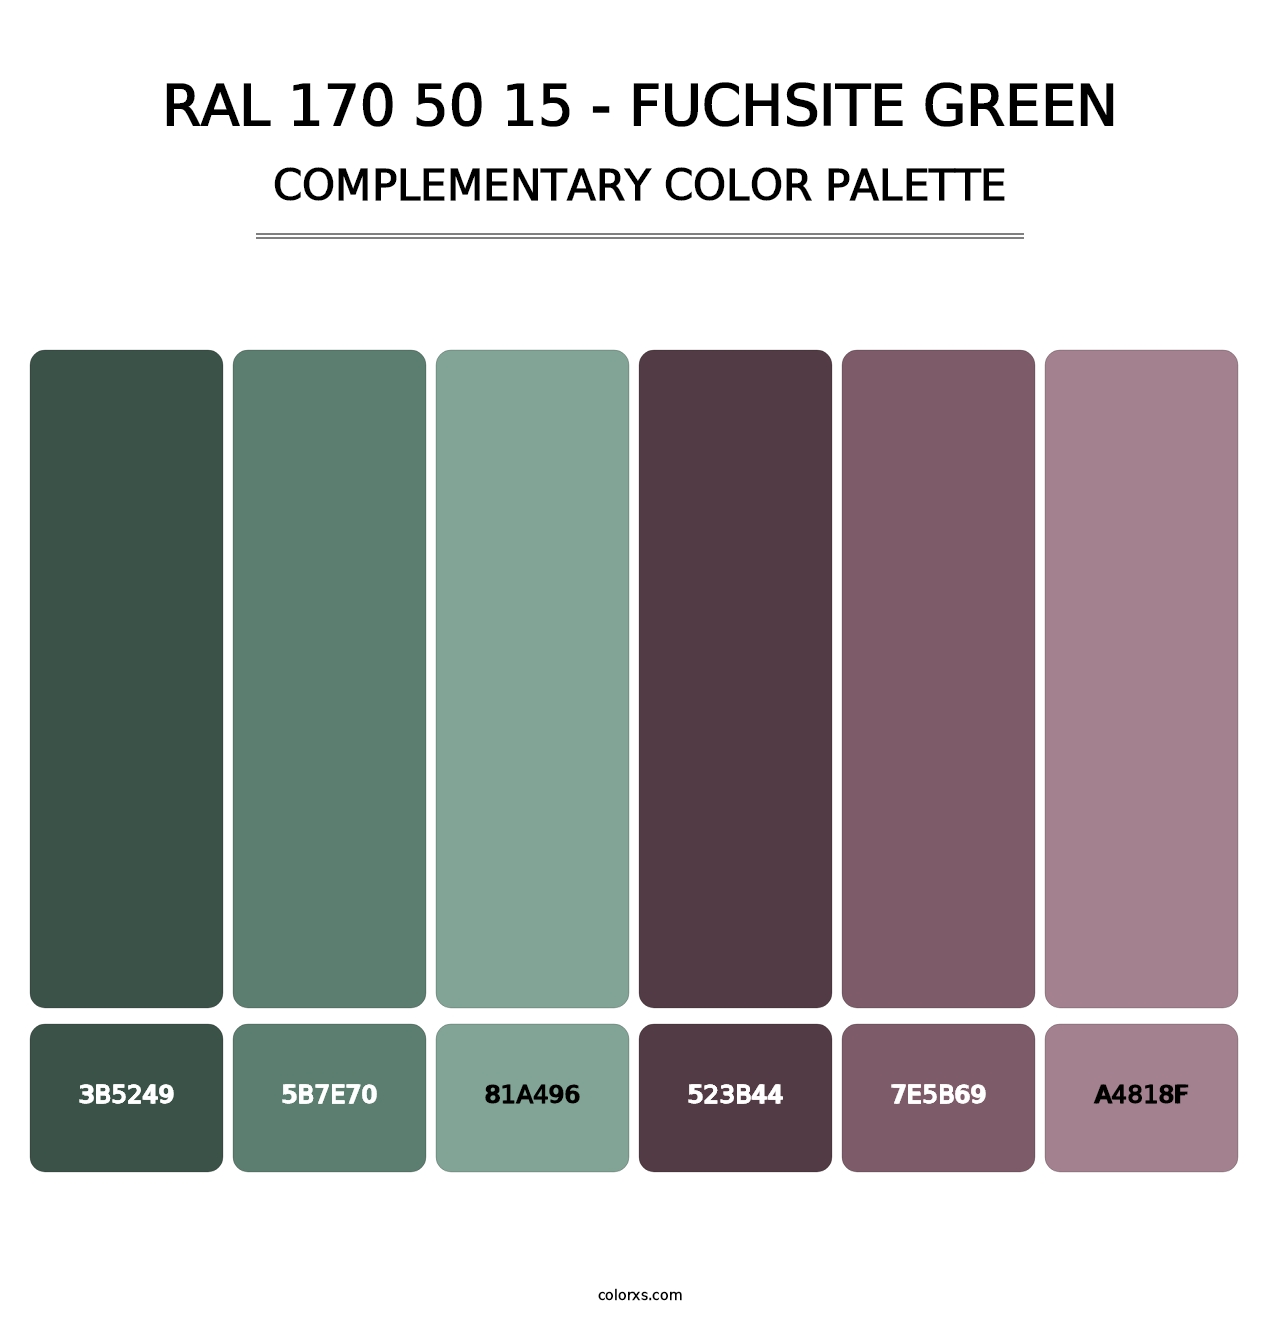 RAL 170 50 15 - Fuchsite Green - Complementary Color Palette